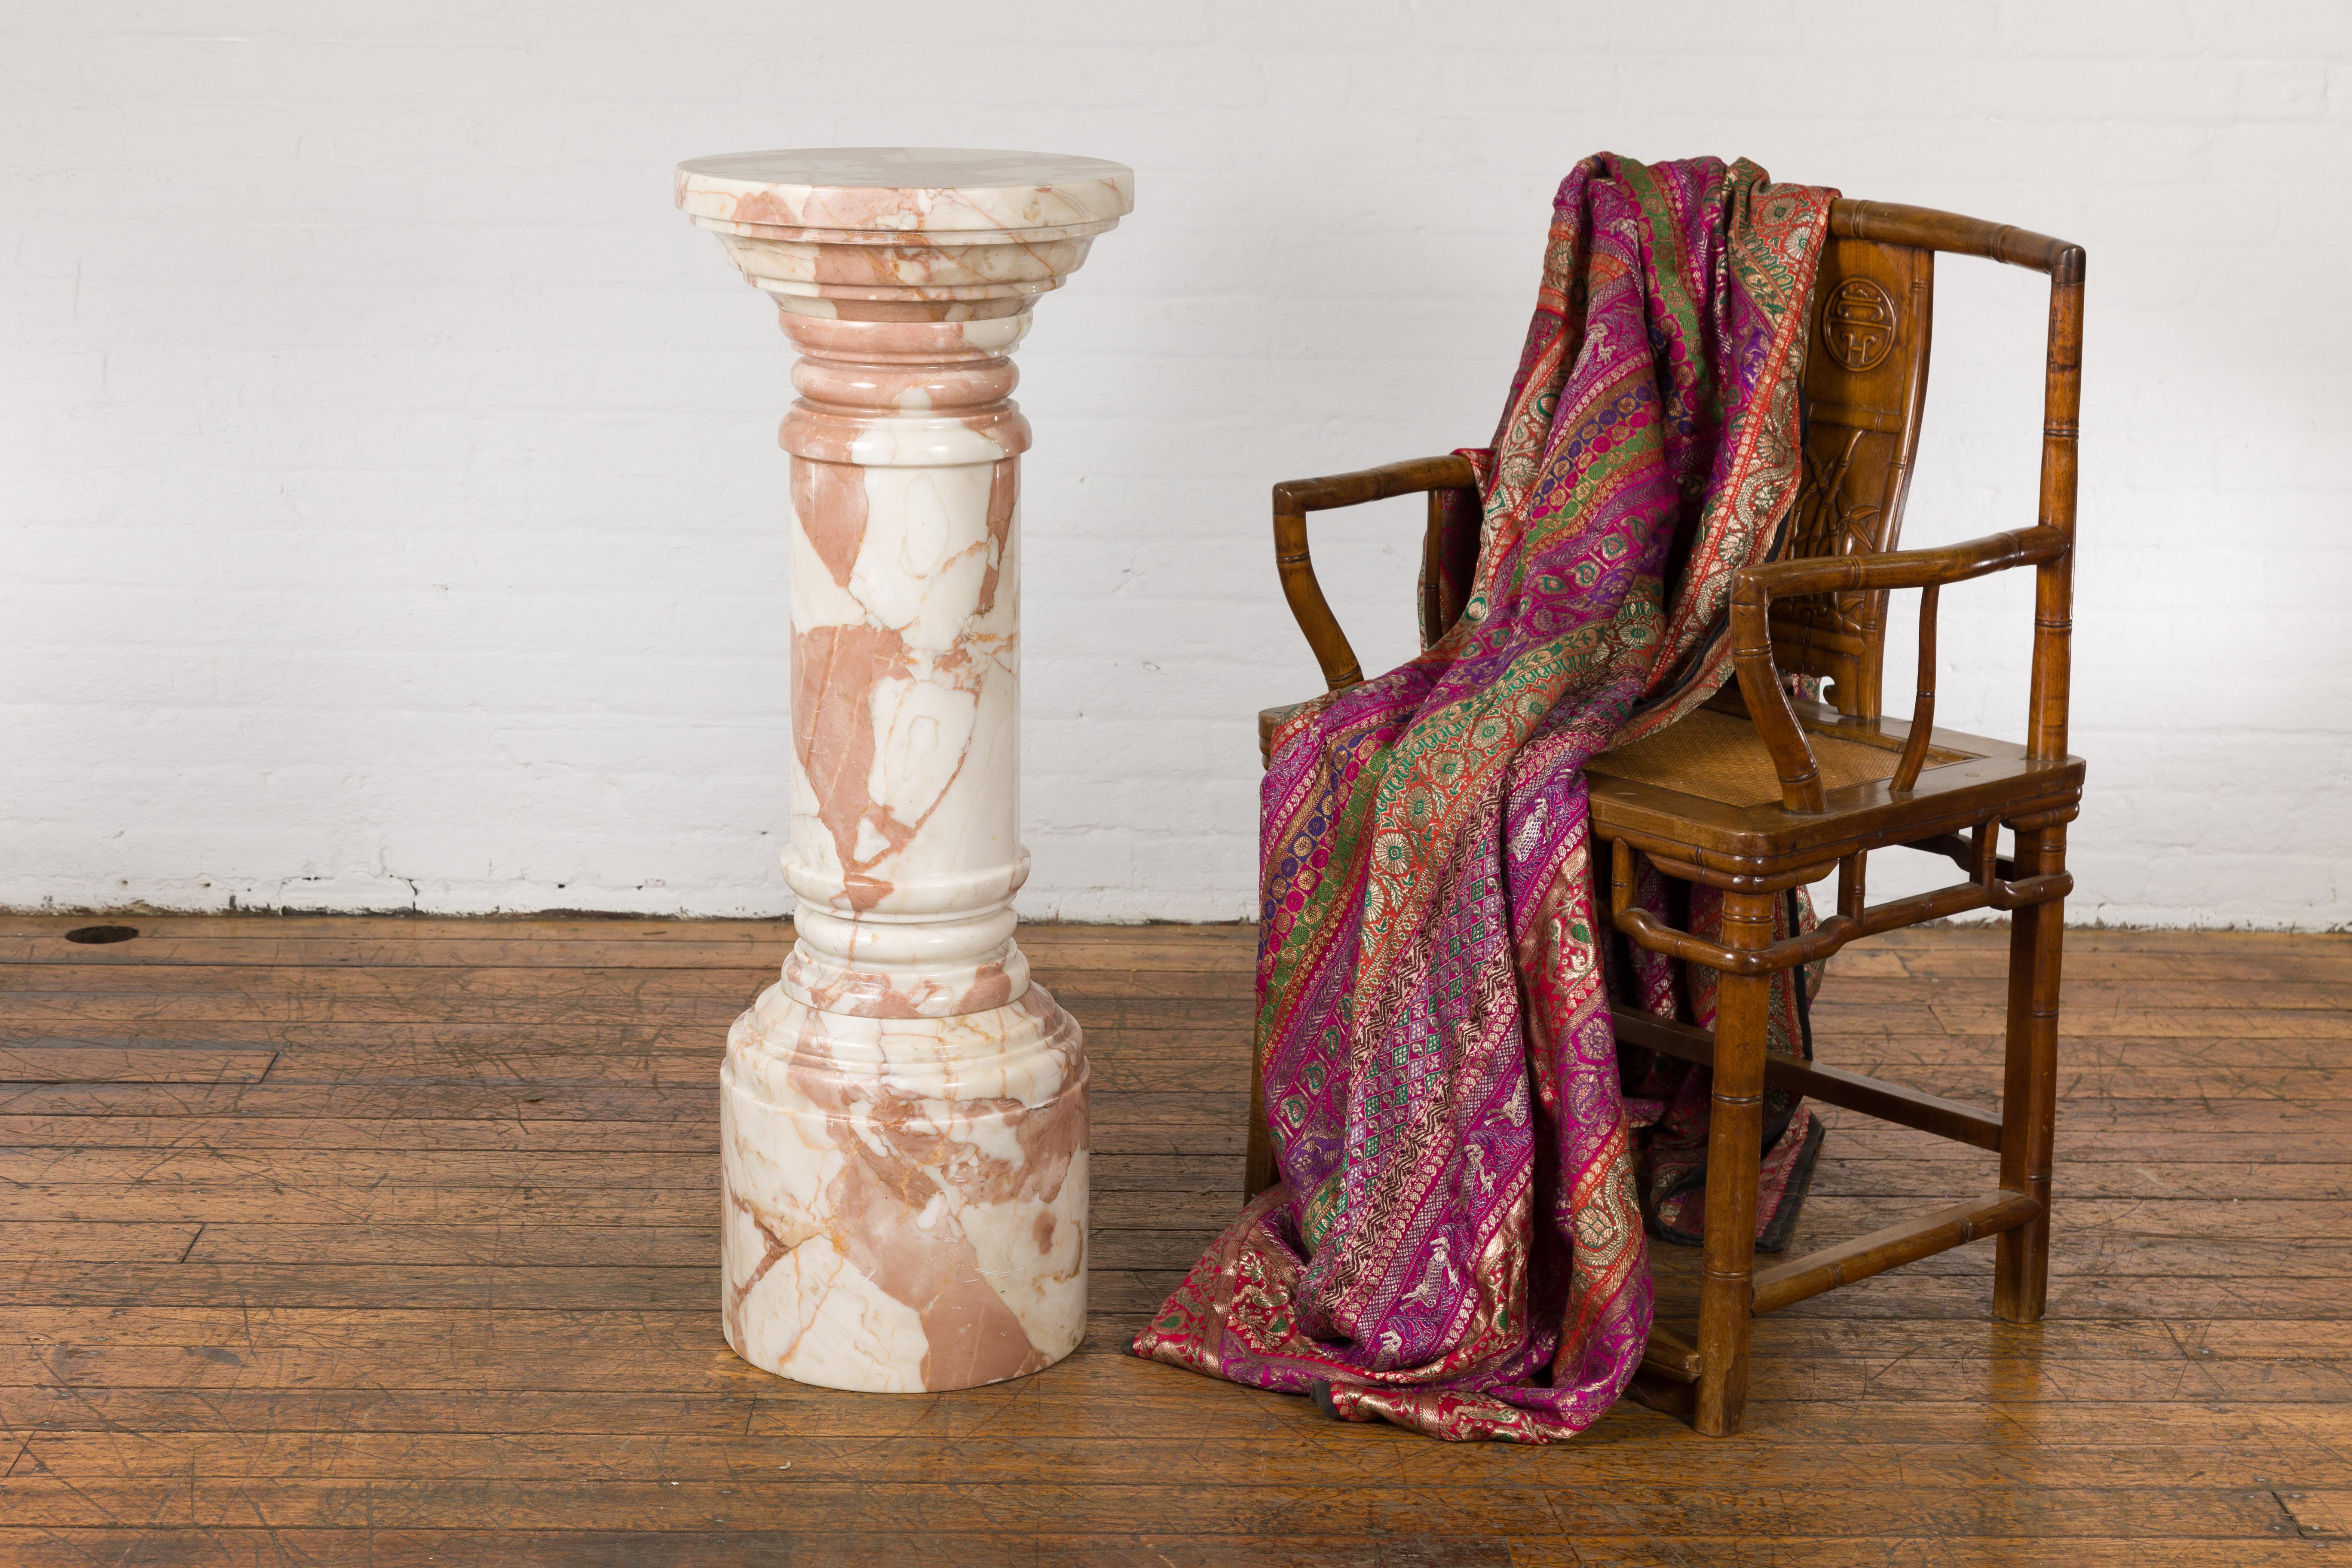 A vintage Indian pedestal from the mid-20th century, with variegated white, pink and brown marble. Emanating an aura of subtle grace, this vintage Indian pedestal from the mid-20th century is a consummate marriage of form and elegance. Crafted with